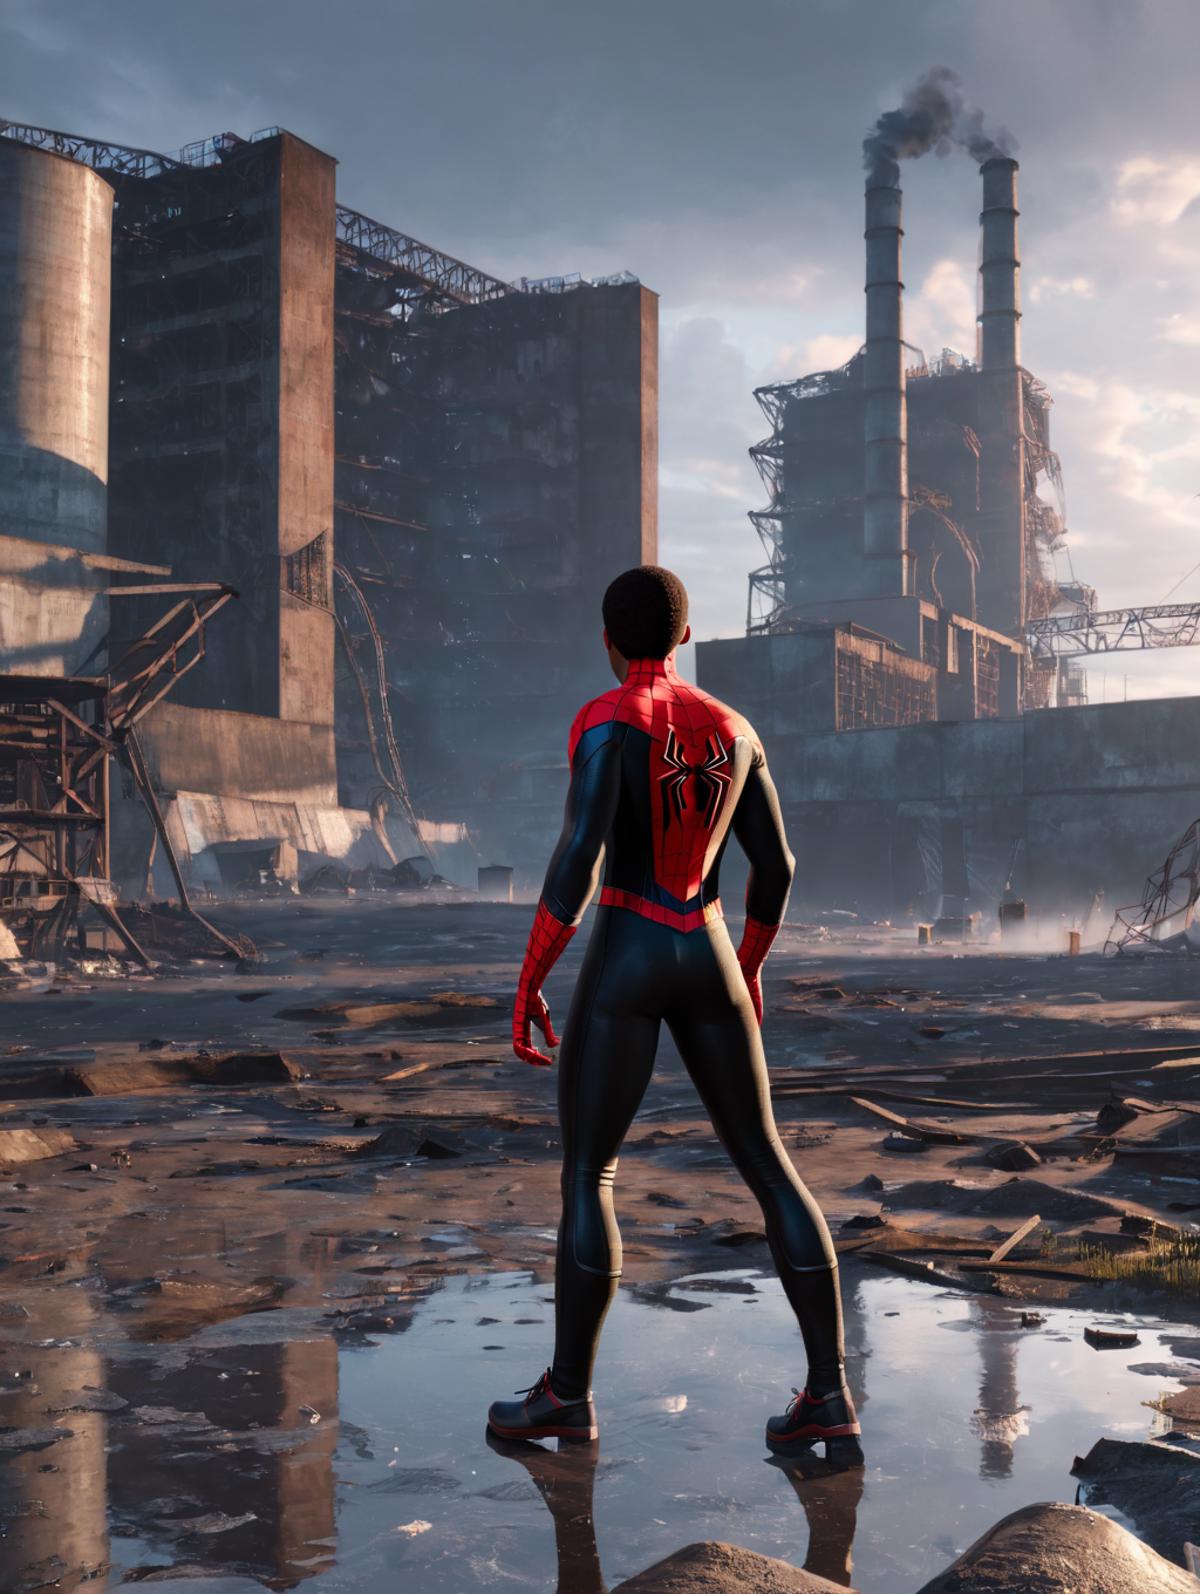 Spiderman in a post-apocalyptic landscape with buildings in the background.